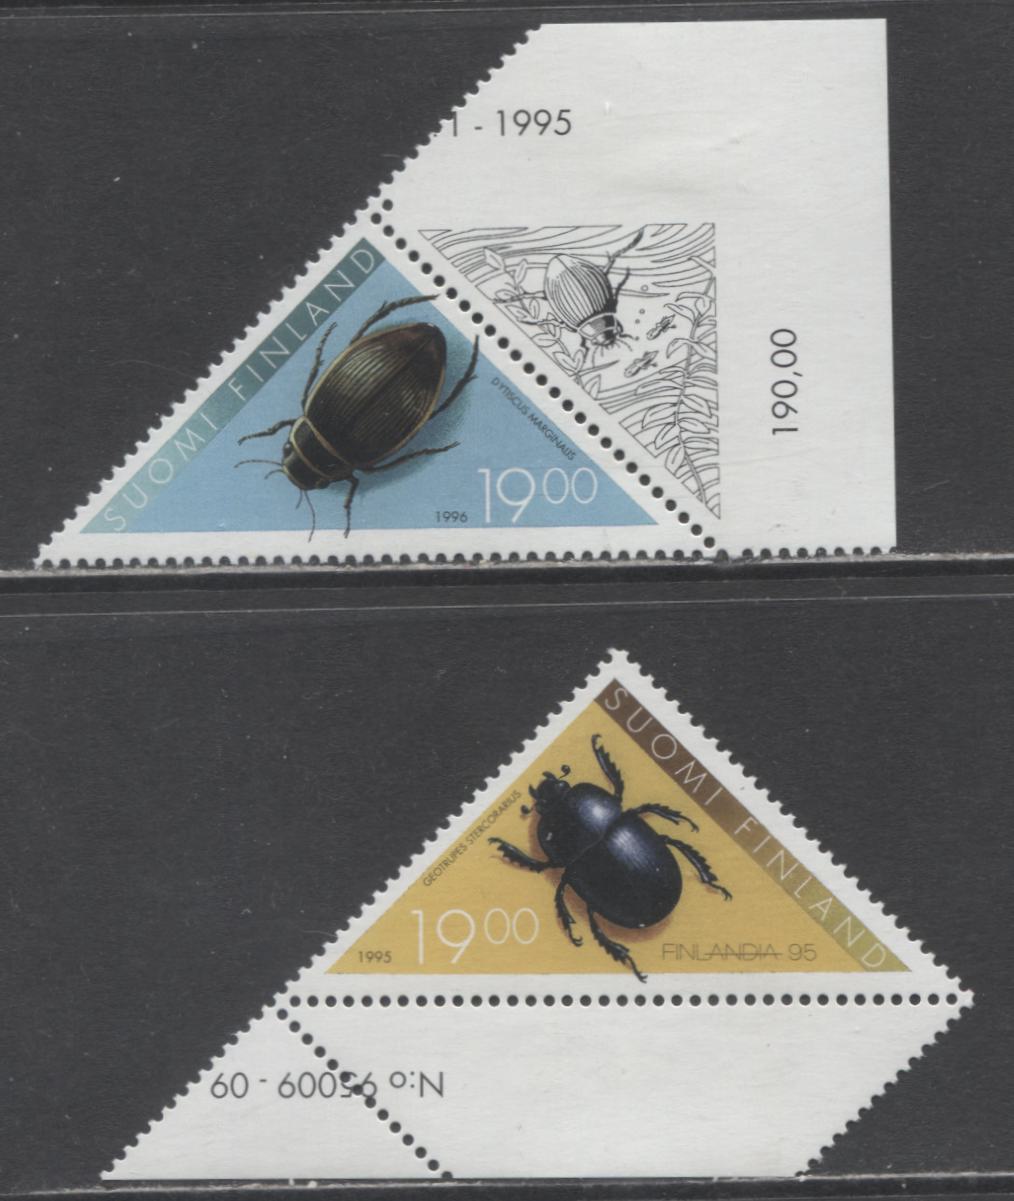 Lot 186 Finland SC#995/1009 1996 Finlandia Issue, 2 VFOG Singles, Click on Listing to See ALL Pictures, 2017 Scott Cat. $20